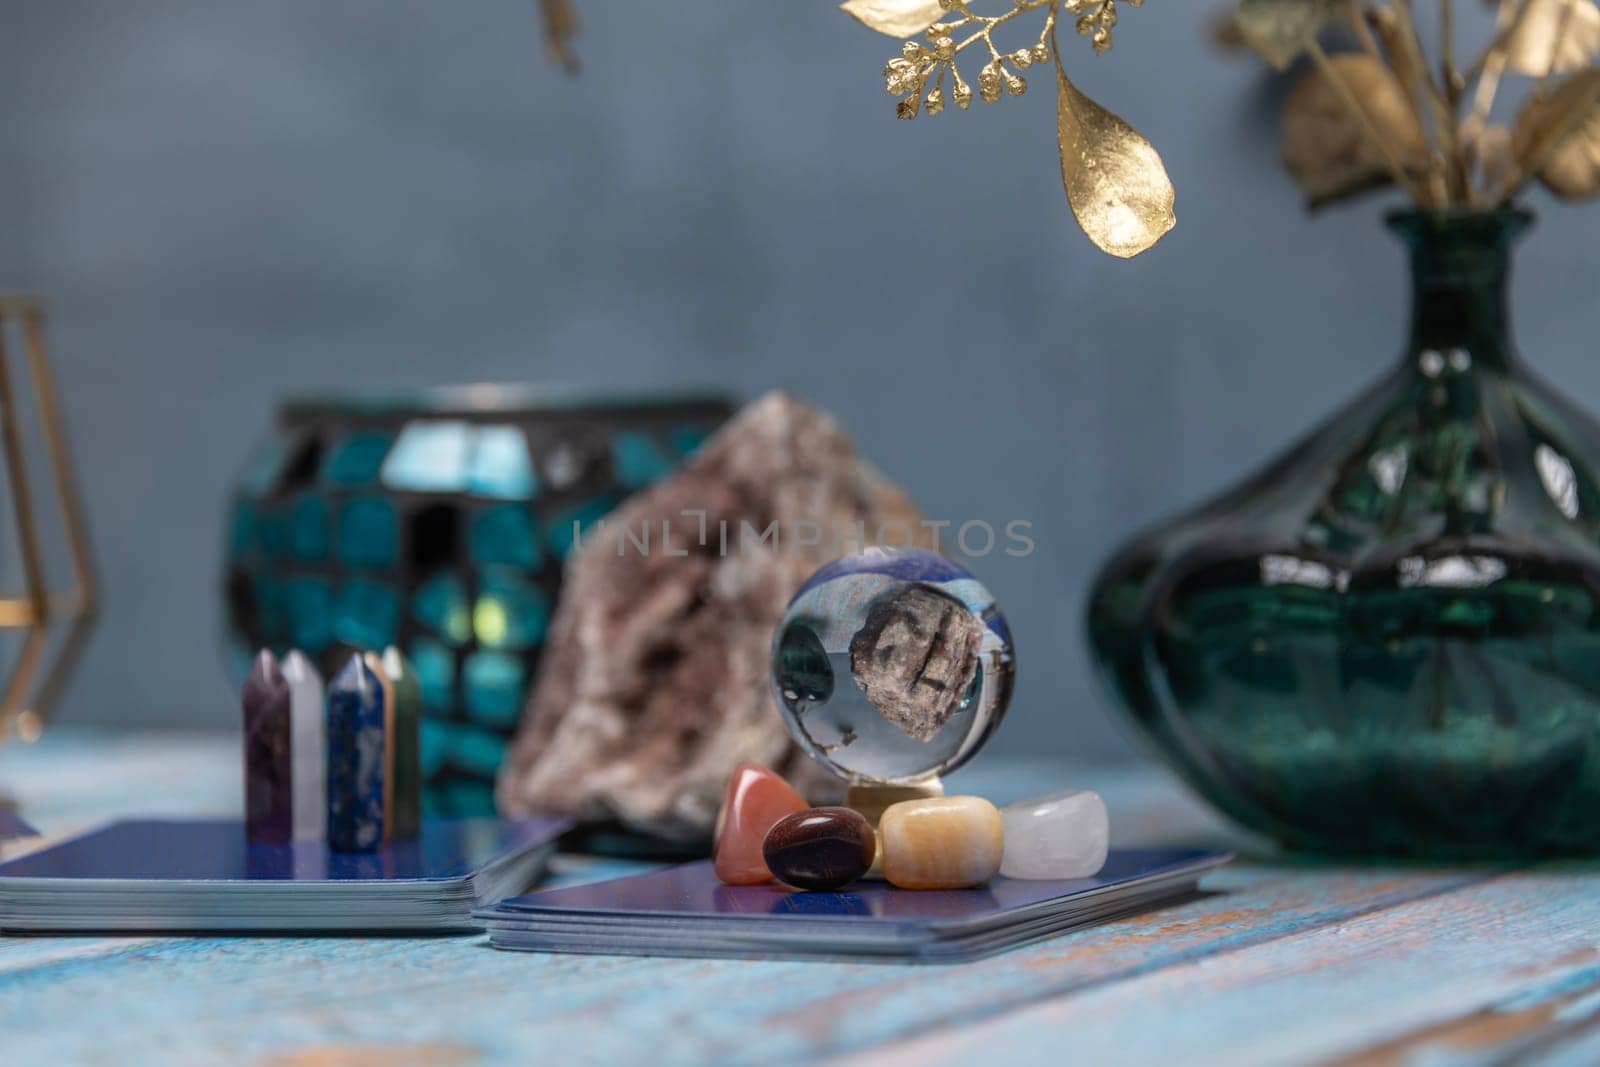 A tarot card reading setup with an array of colorful healing crystals on a weathered wooden table, invoking a sense of mysticism